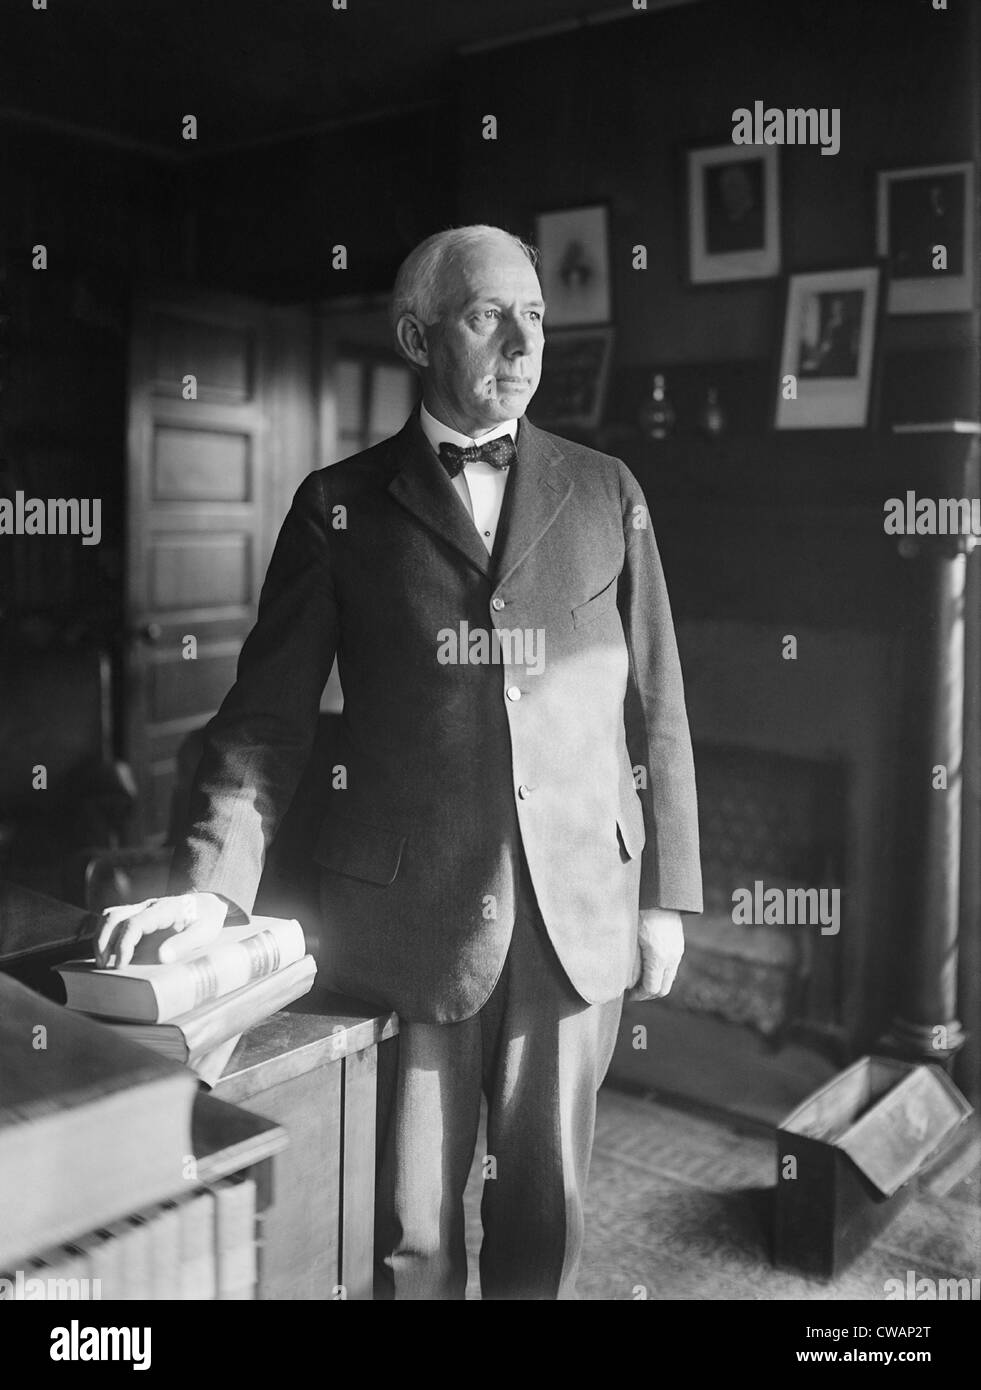 Willis Van Devanter (1859-1941), Associate Justice of the United States Supreme Court from 1911 to 1937. A Taft appointee, he Stock Photo